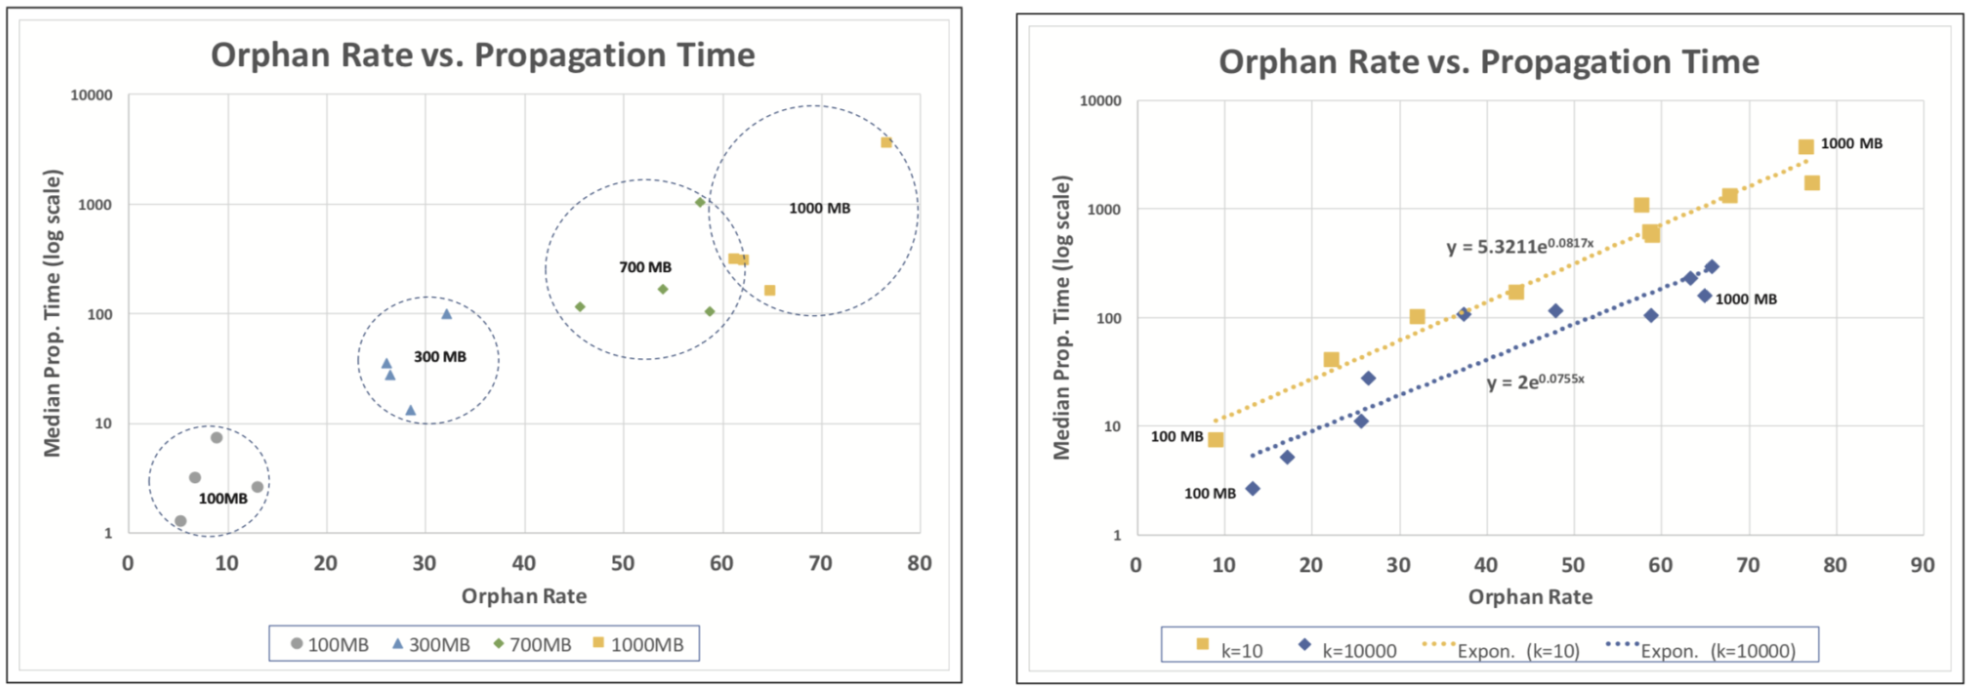 orphan-rates-and-prop-times